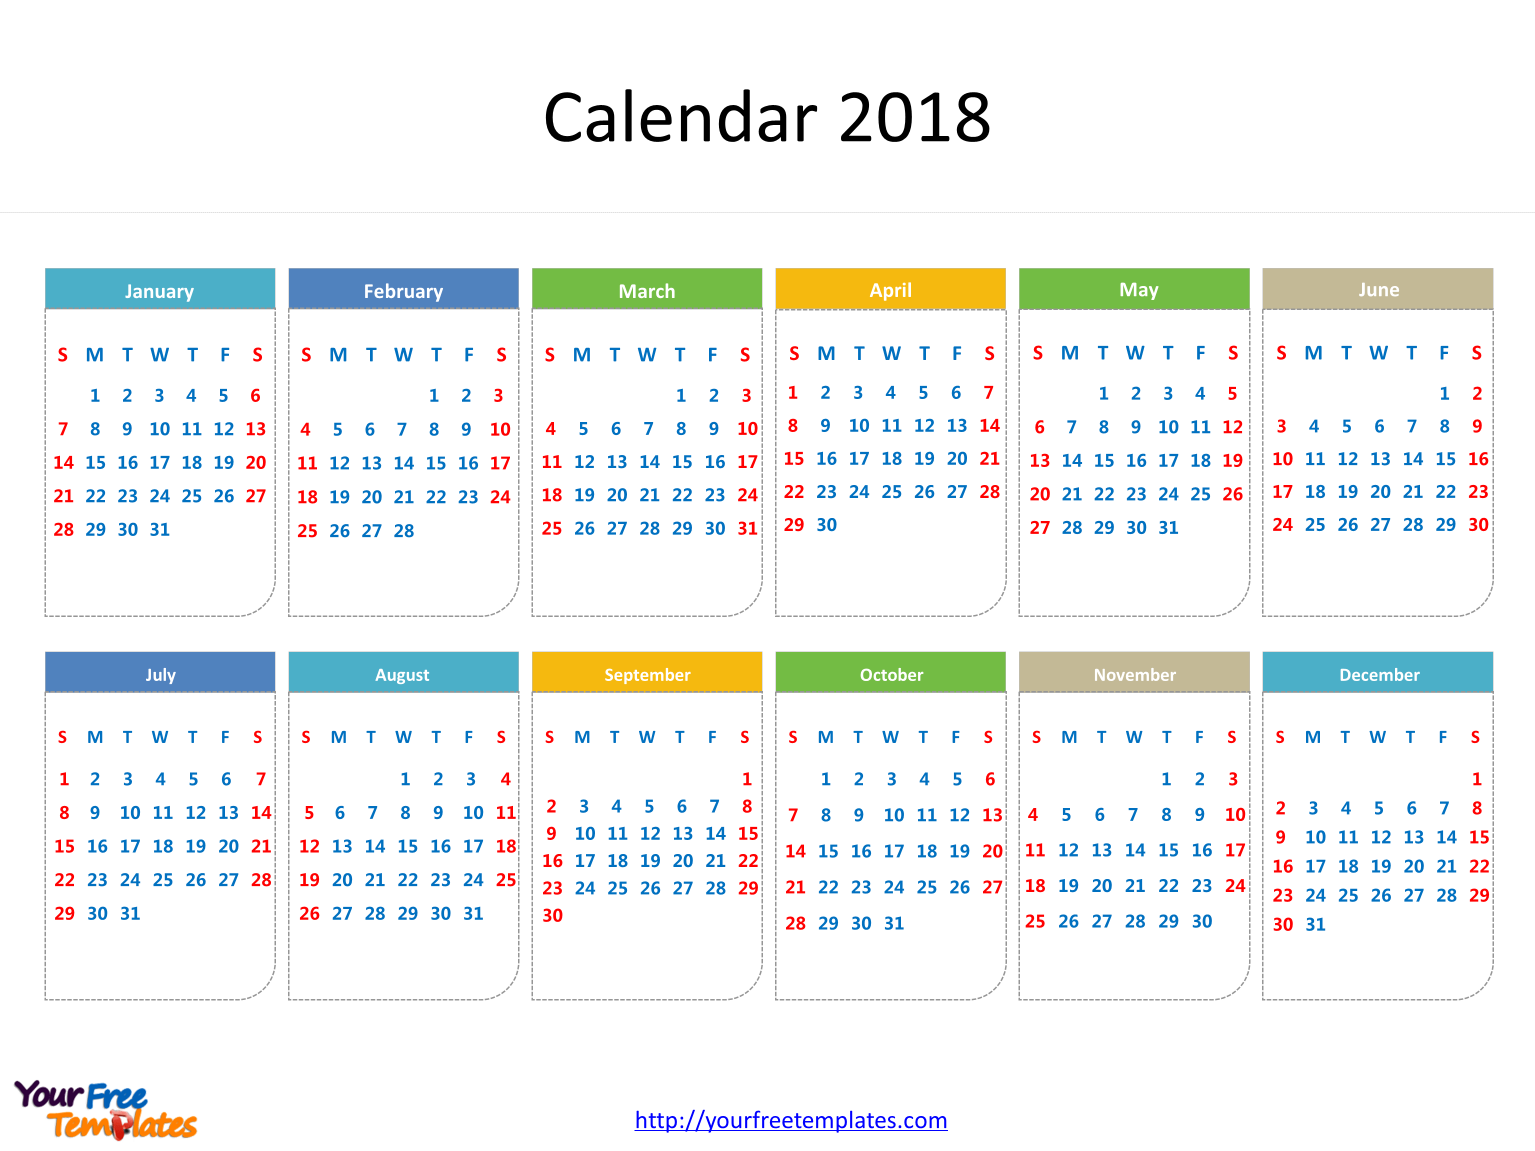 2018 calendar with dates of six months in it